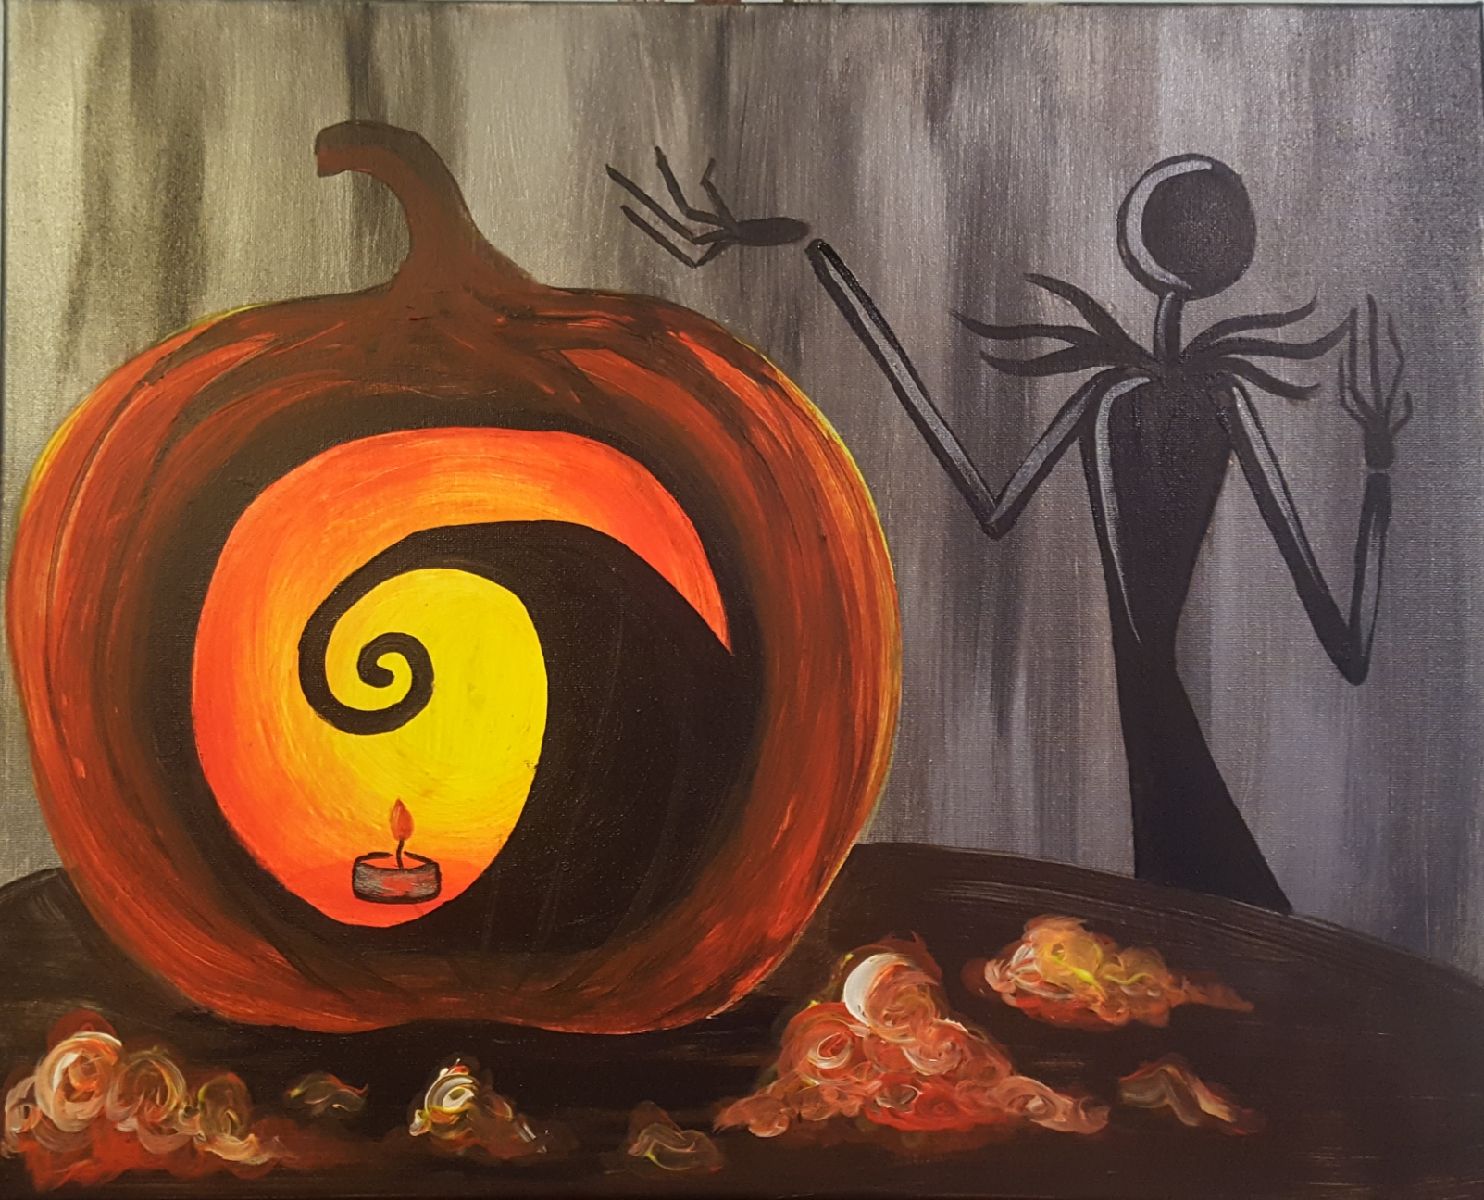 The Pumpkin Carving King - Pinot's Palette Painting